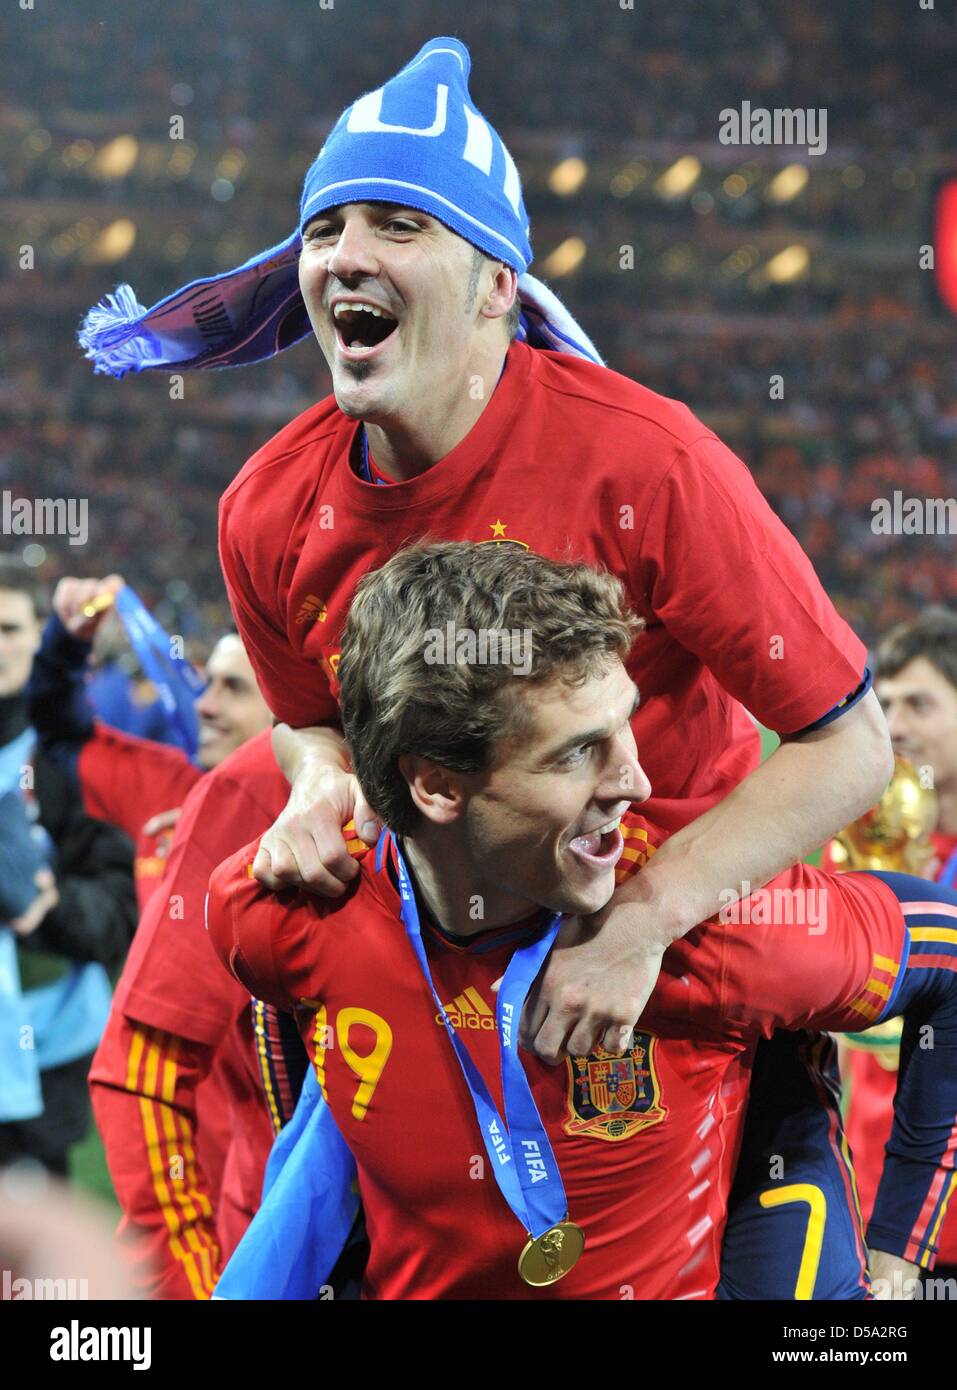 David Villa (top) and Fernando Llorente of Spain celebrate after the final whistle of the 2010 FIFA World Cup final match between the Netherlands and Spain at the Soccer City Stadium in Johannesburg, South Africa 11 July 2010. Photo: Bernd Weissbrod dpa - Please refer to http://dpaq.de/FIFA-WM2010-TC Stock Photo